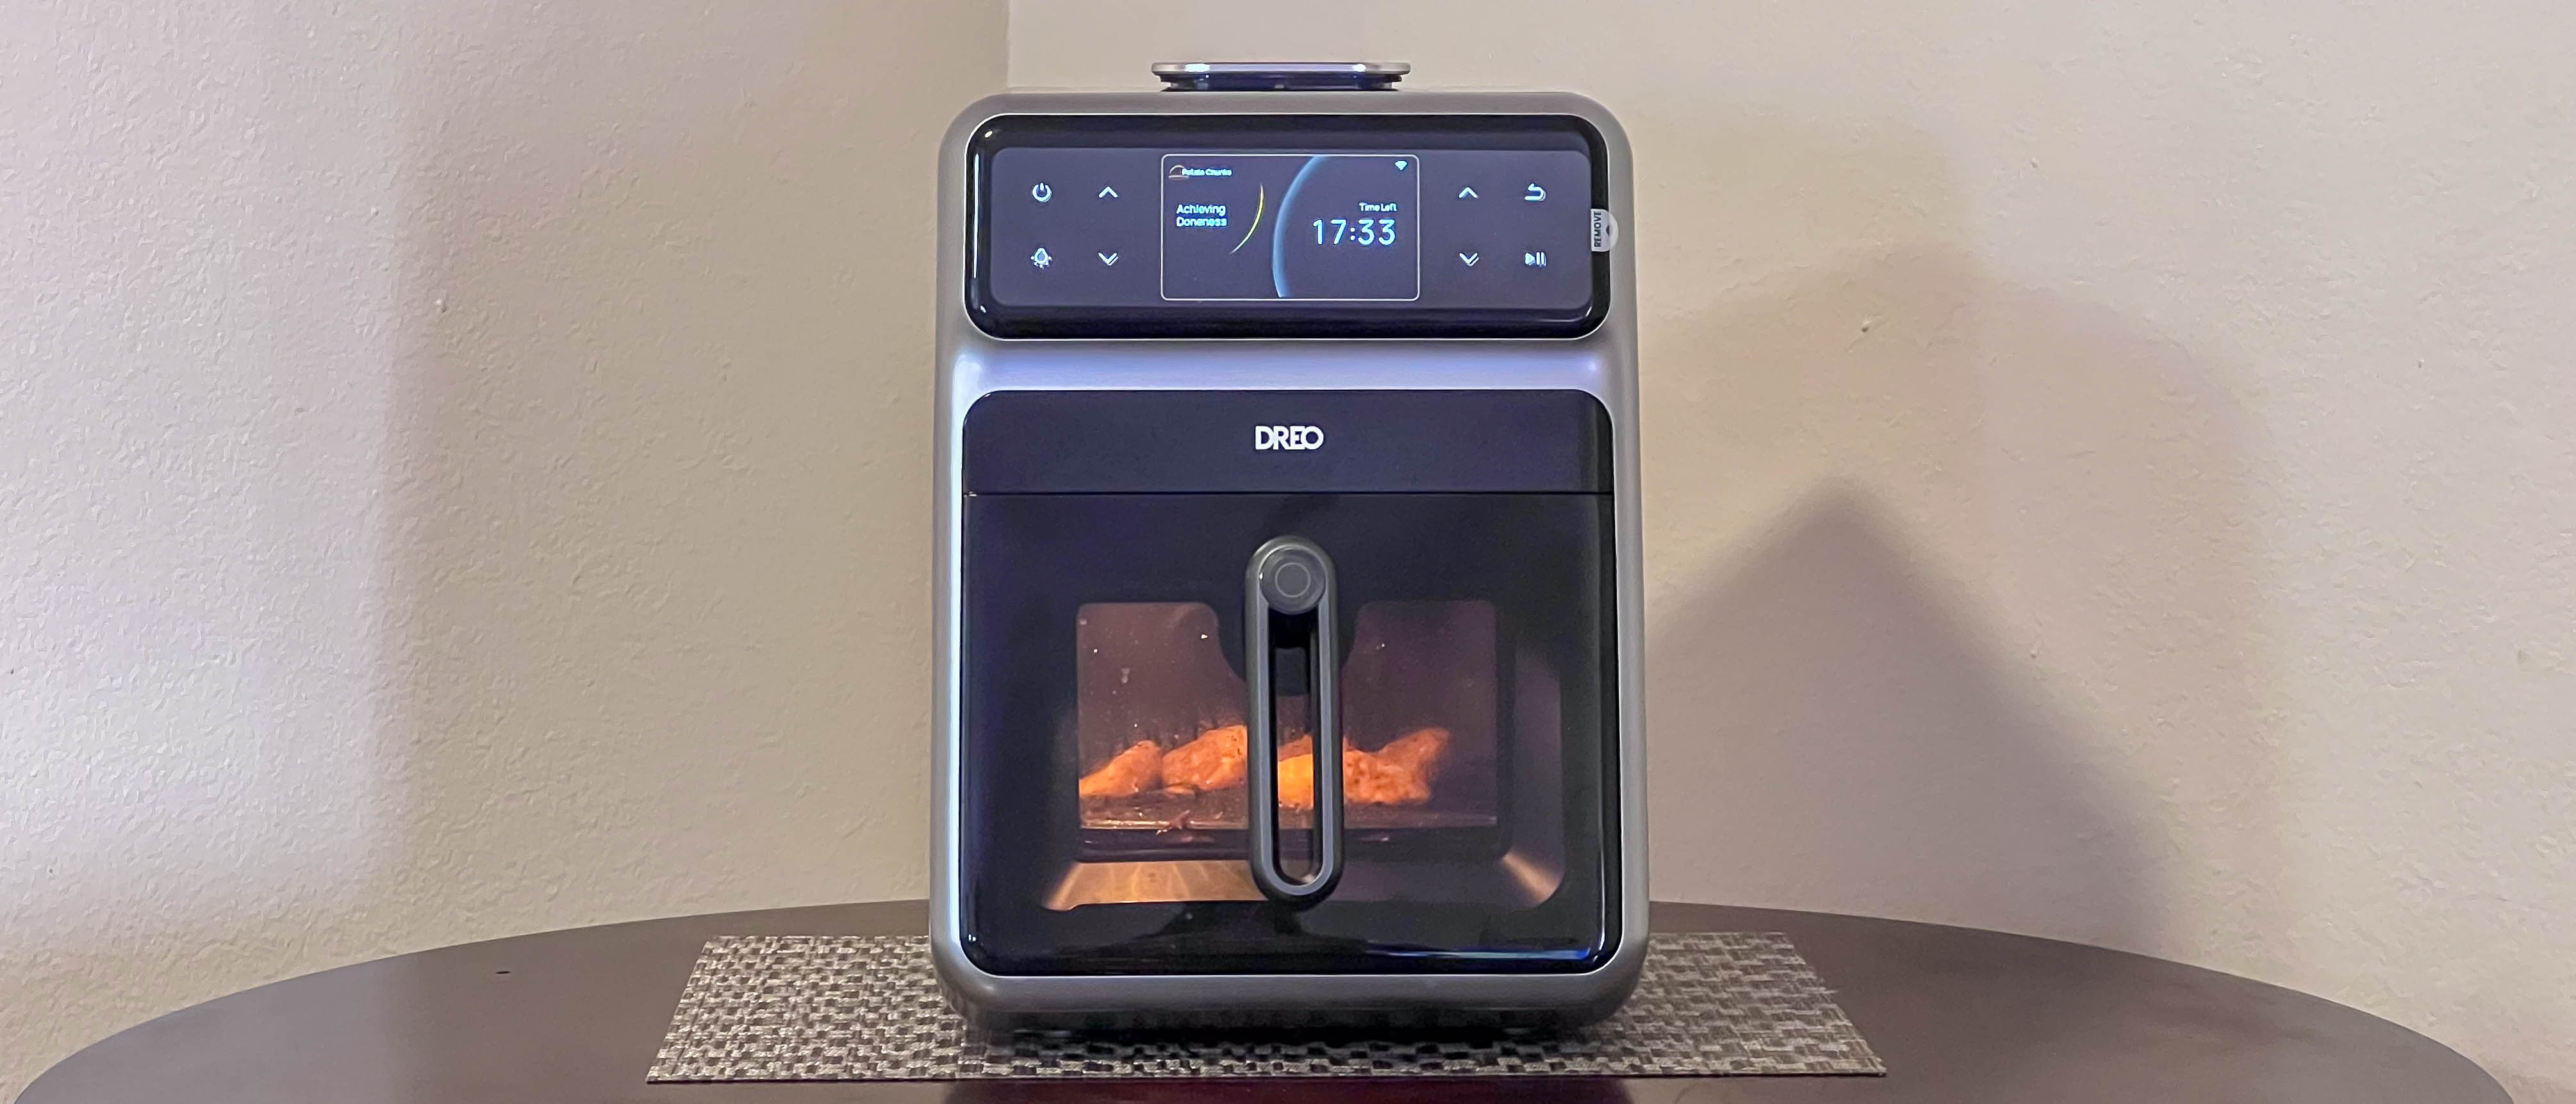 THE DREO CHEF MAKER/THE EASIEST COMBI FRYER I EVER USED TO ACHIEVE